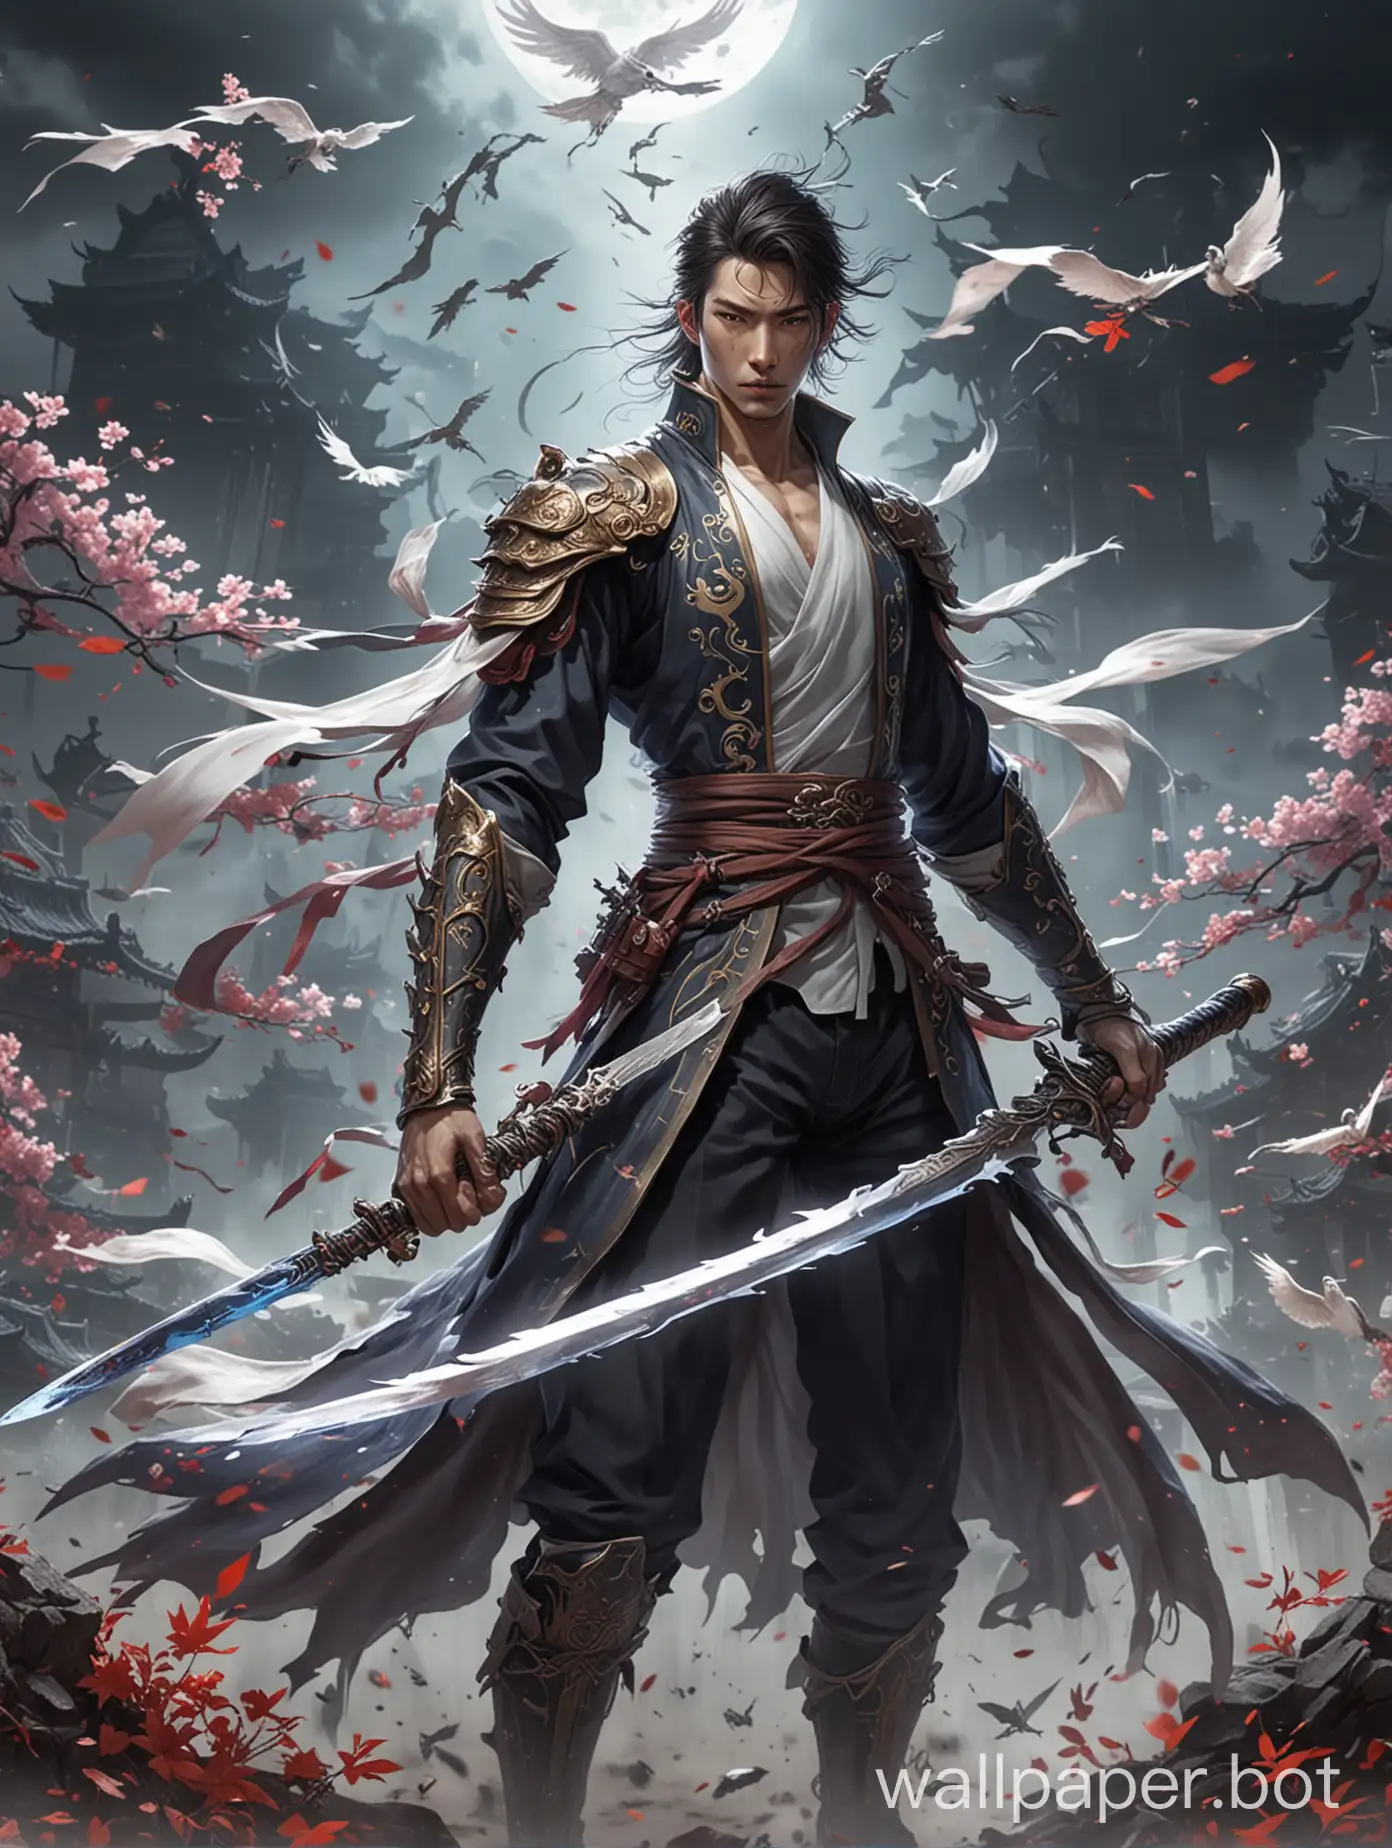 Handsome-Immortal-Cultivator-Battling-Infinite-Terror-with-Flying-Sword-in-Chinese-Fantasy-Style